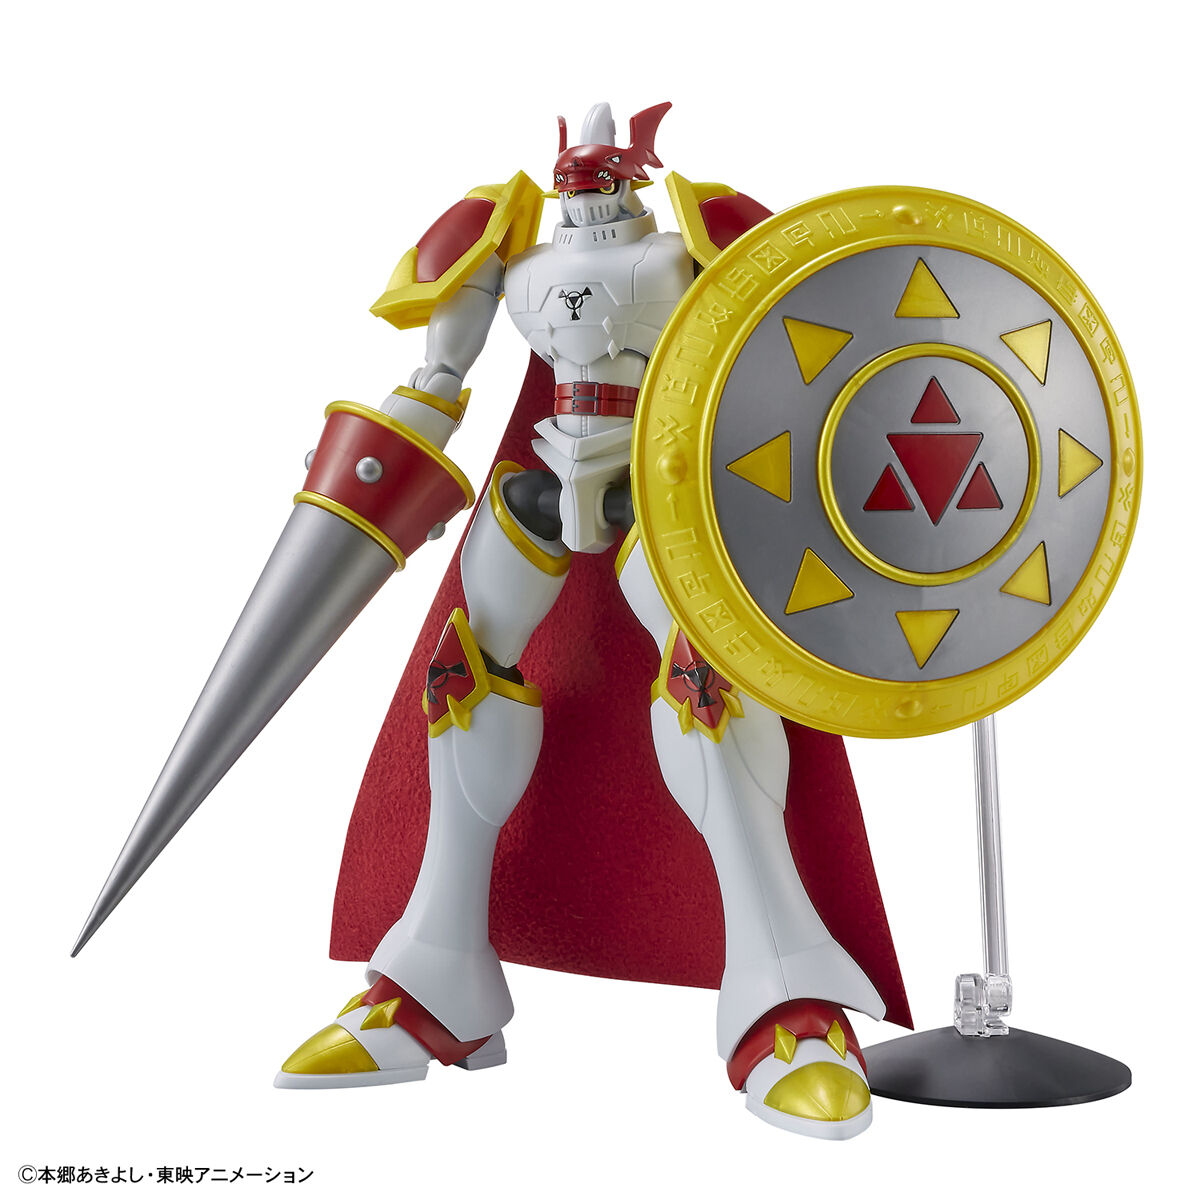 Digimon - Gallantmon - Figure-rise Standard Model Kit, Holy Knight Digimon "Gallantmon" faithfully recreated in model kit form with dynamic action poses, weapons in silver color, and detailed engraving of Digicode on the "Aegis Shield", Nippon Figures